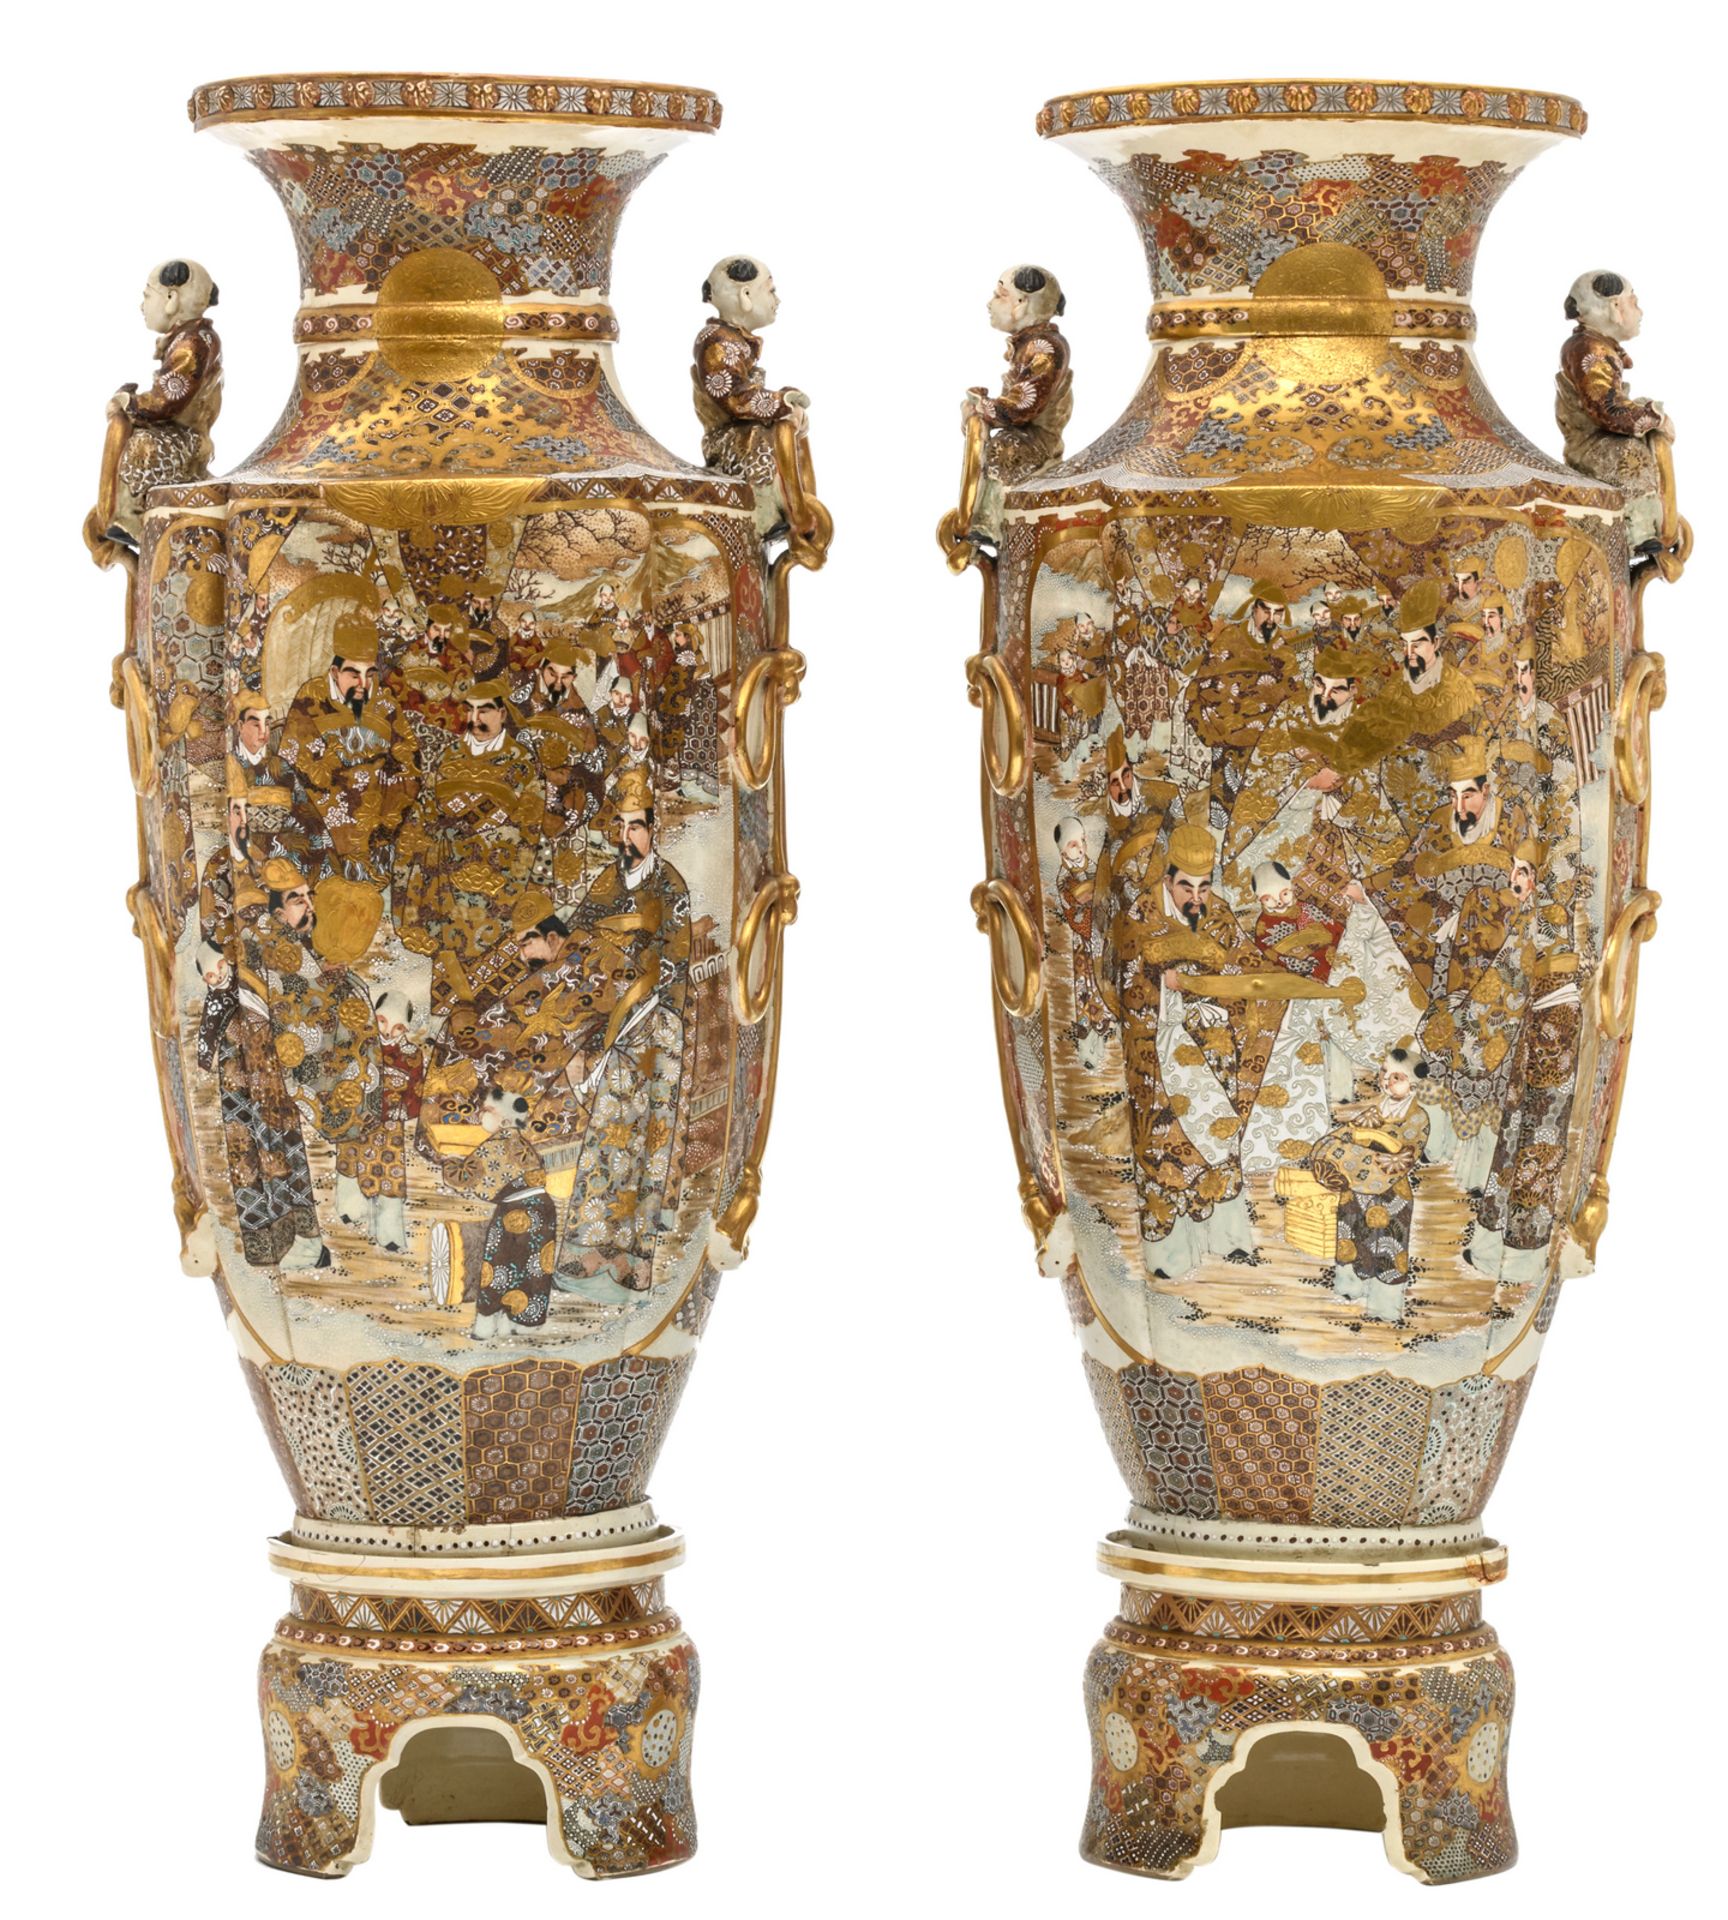 A fine pair of Japanese Satsuma and relief decorated vases on ditto soccles, late Edo period, H